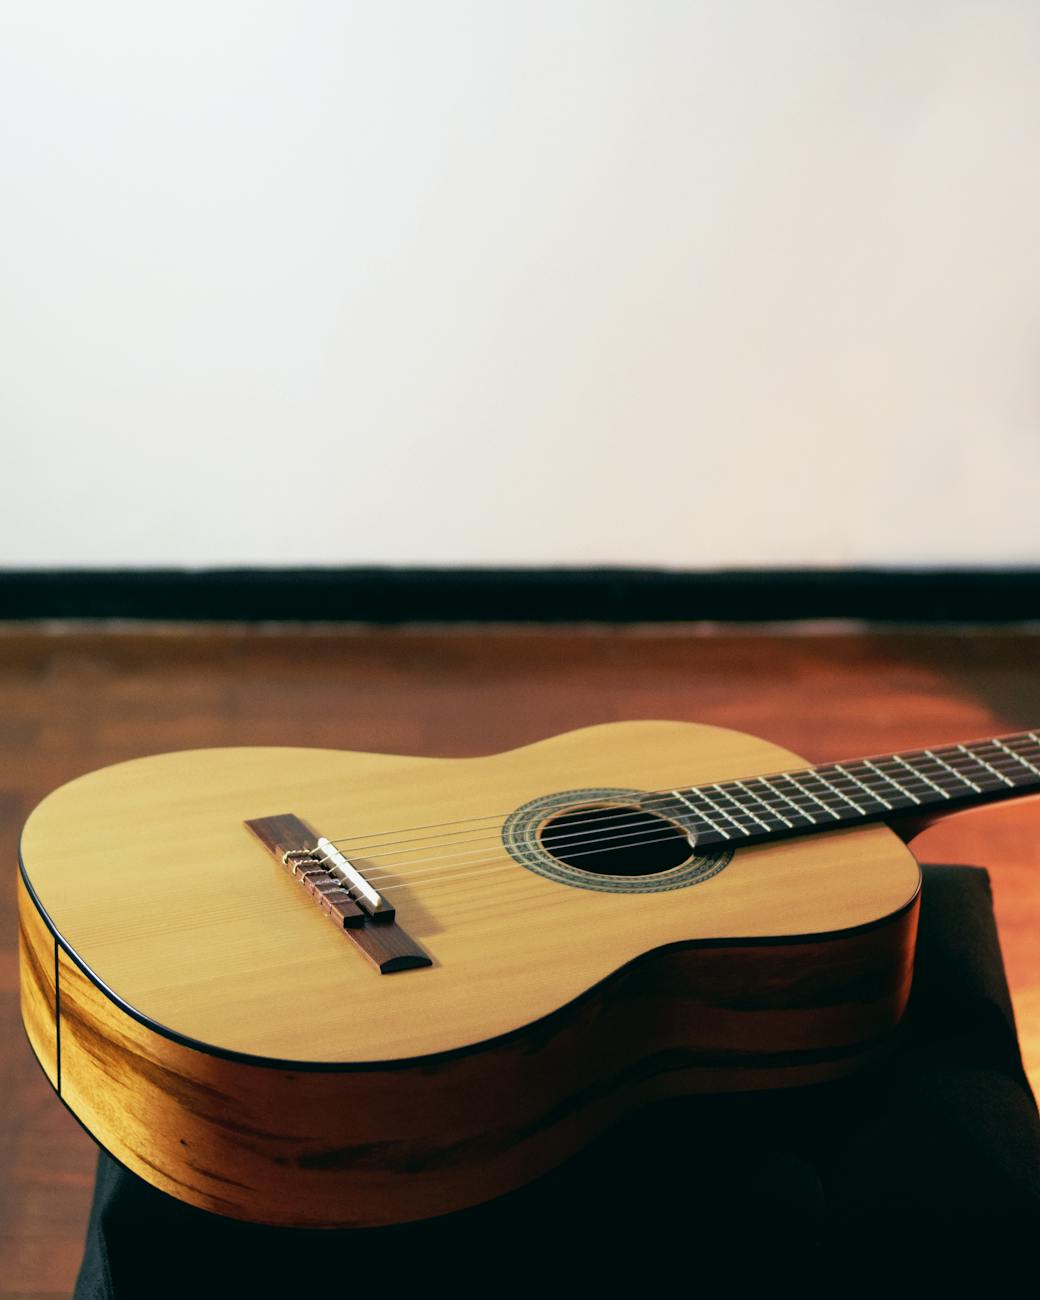 Seeking A Doctoral Guitar Degree Without A University